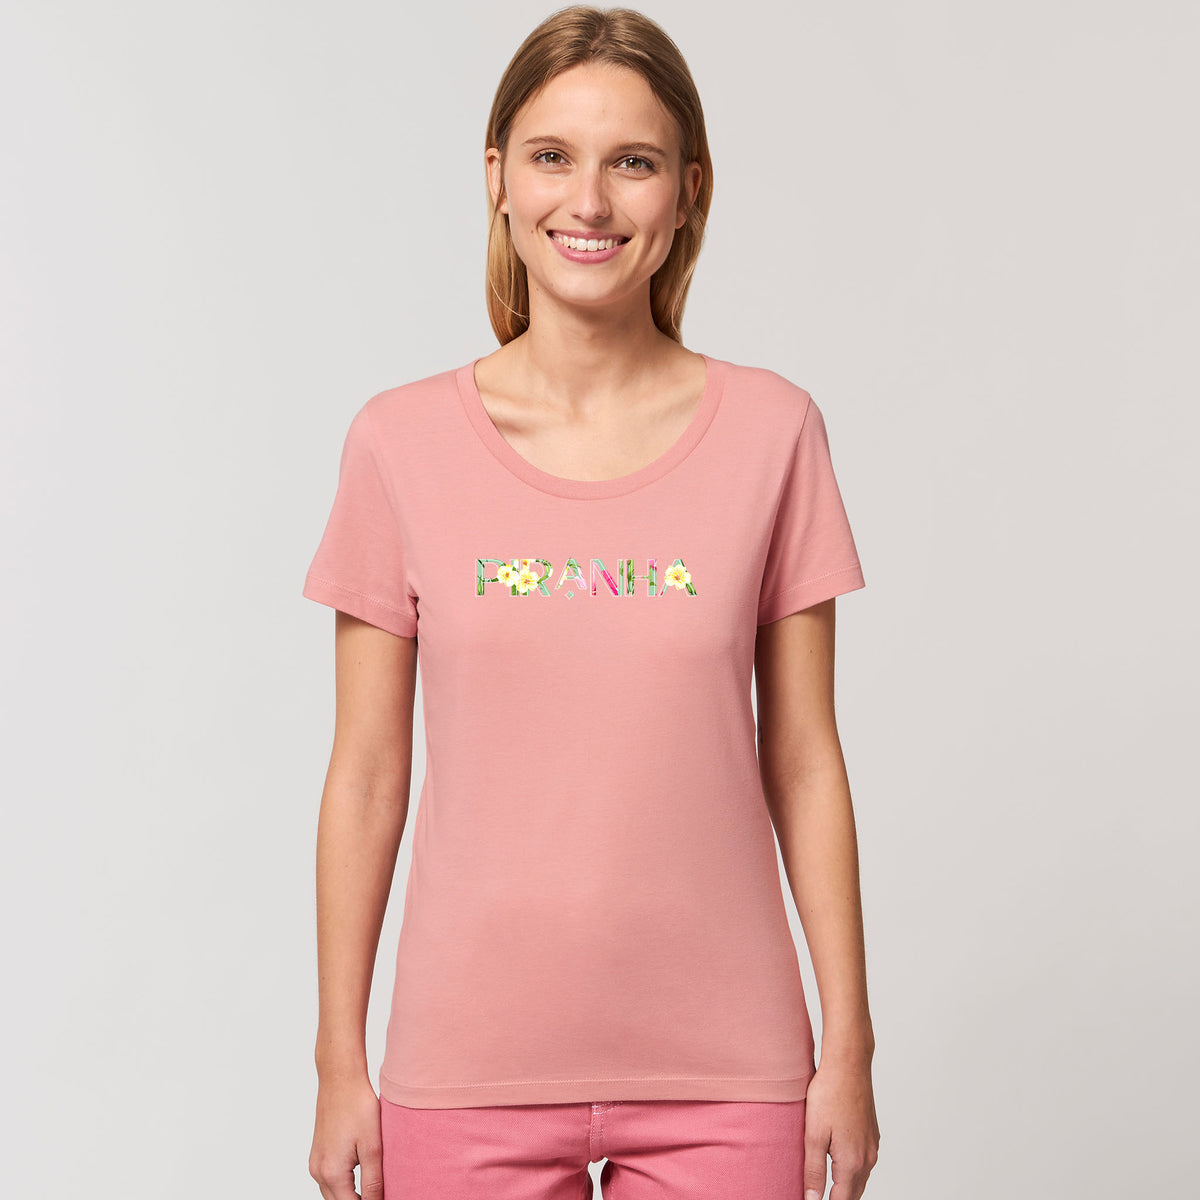 Piranha Lifestyle Womens Fitted T-Shirt: Canyon Pink